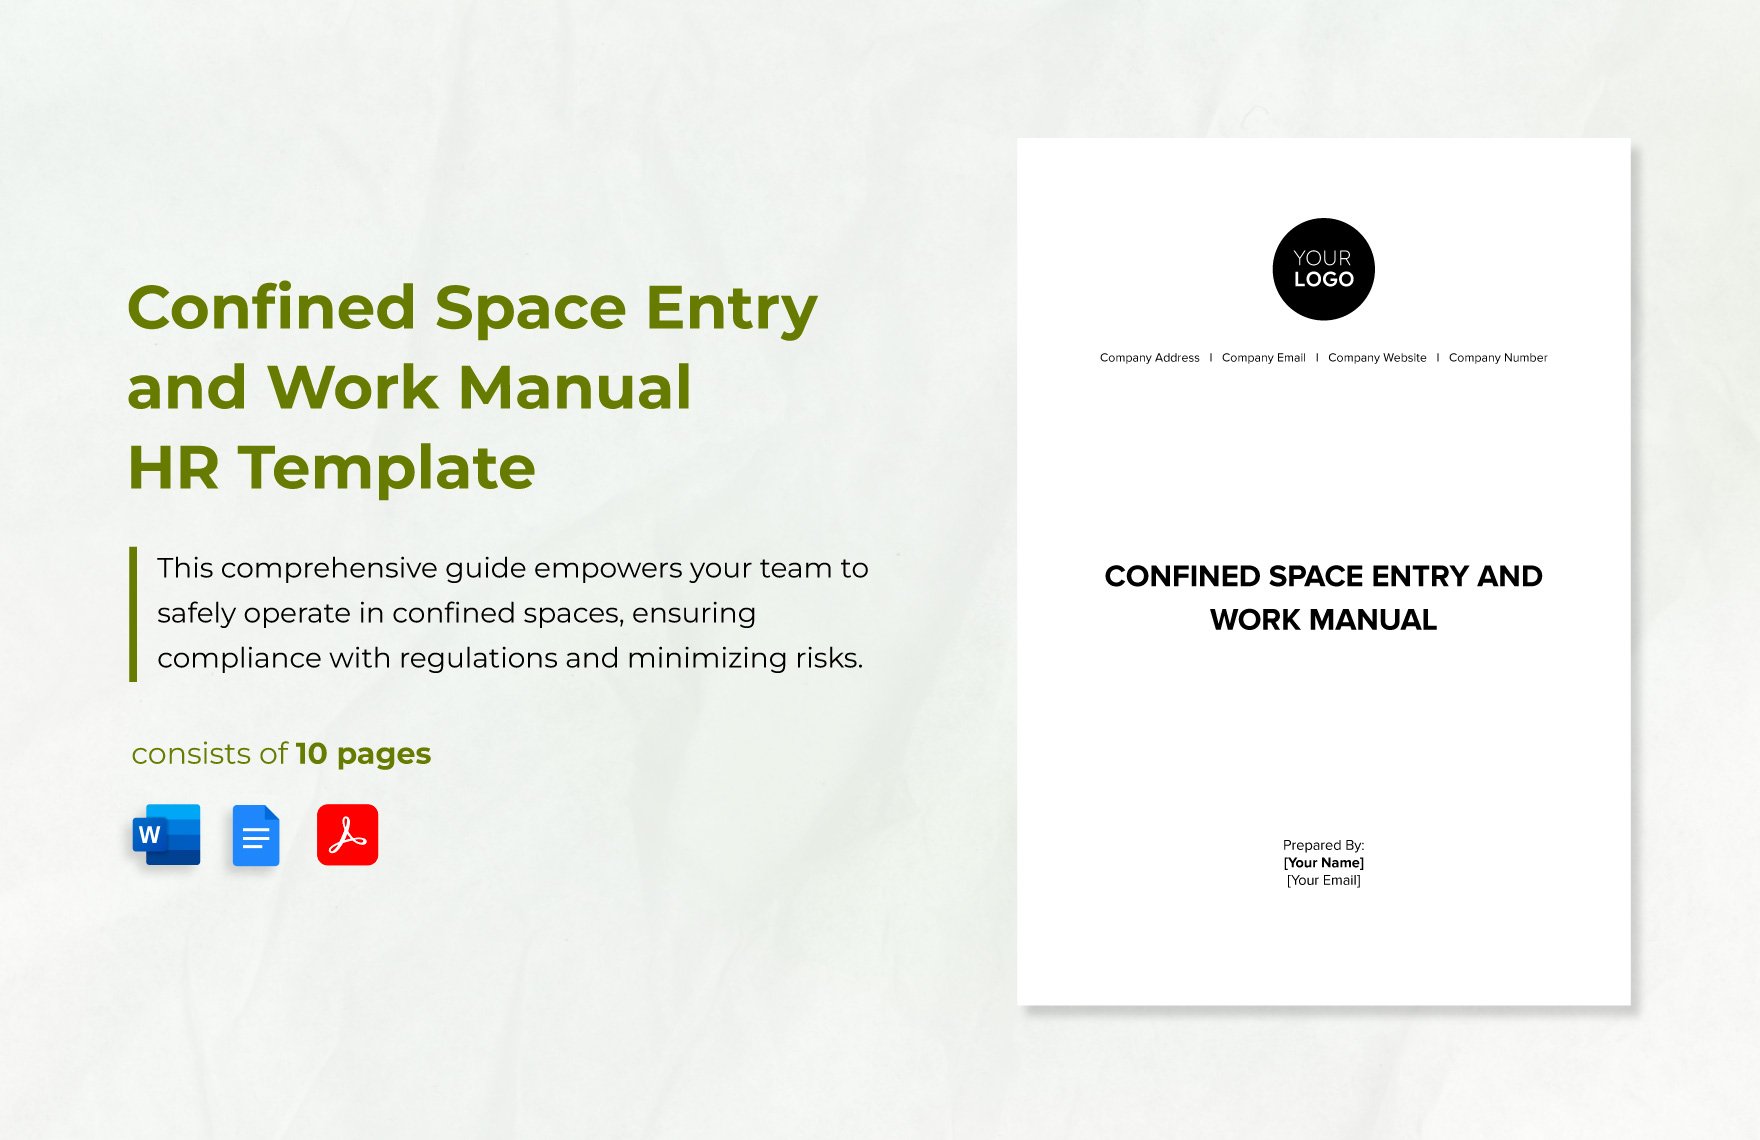 Confined Space Entry and Work Manual HR Template